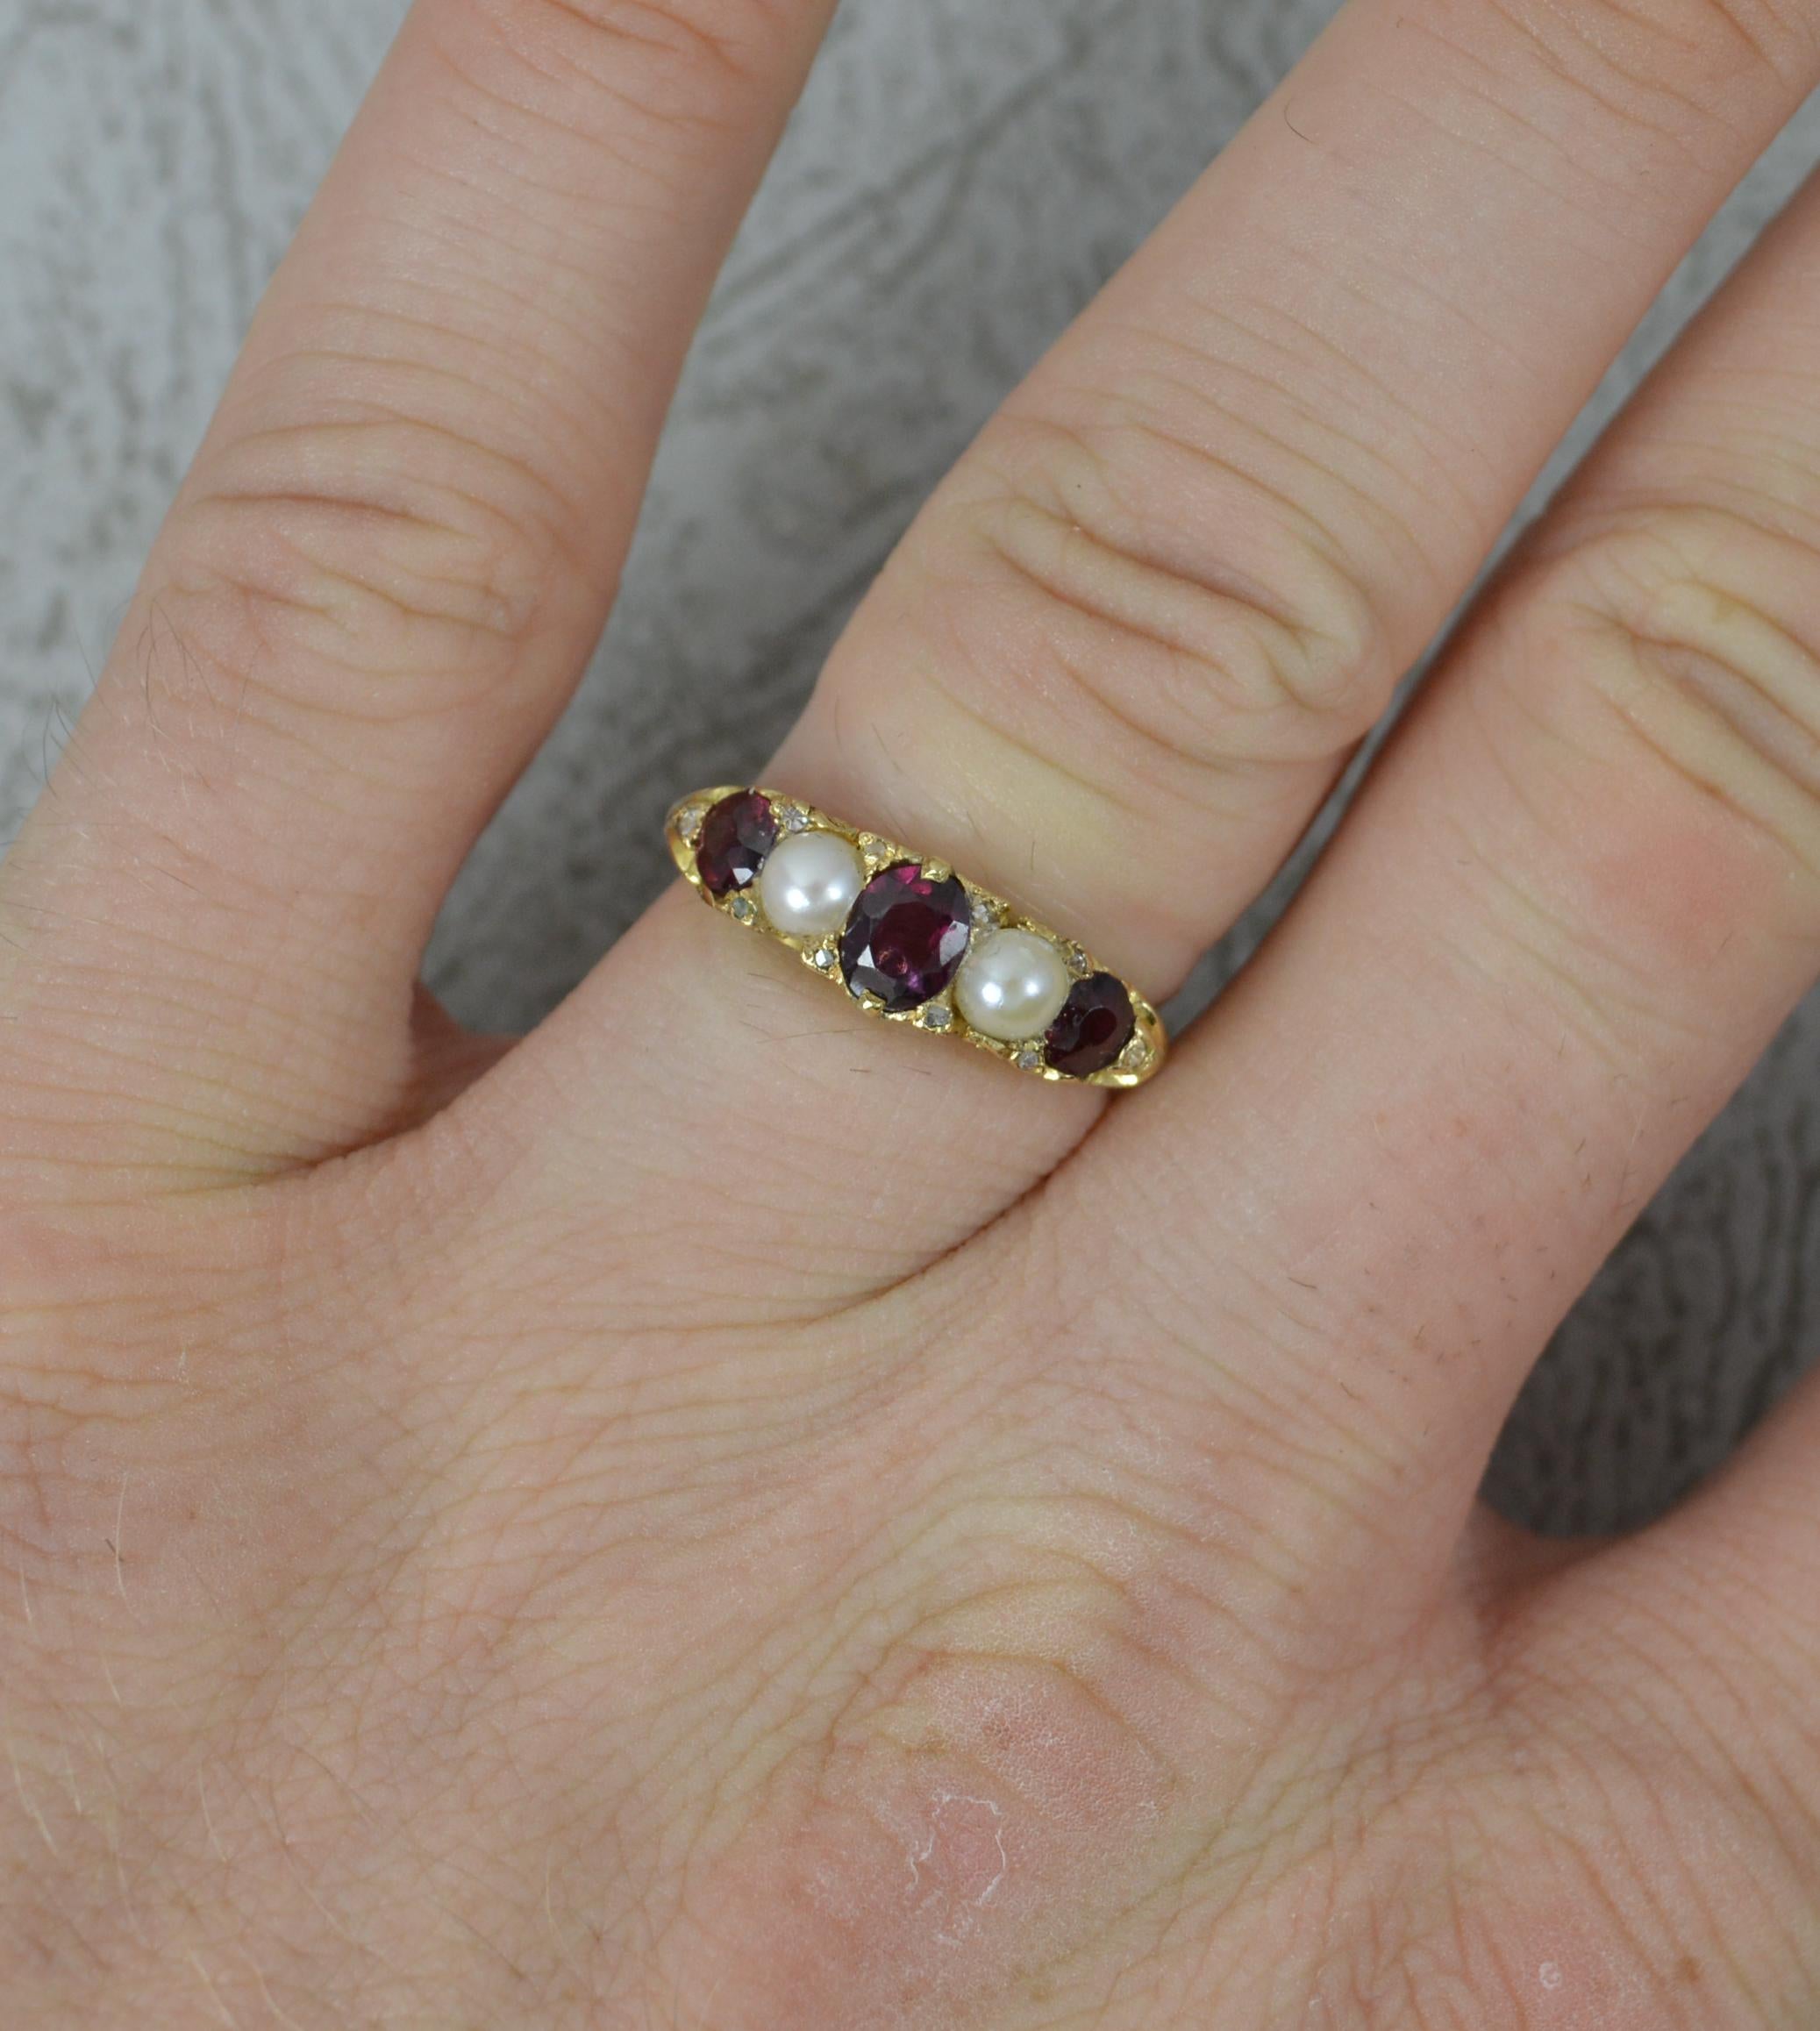 A fine 18 carat gold, garnet, pearl and diamond five stone ring. c1880.
18 carat yellow gold shank and setting with deep floral scroll work.
Designed with alternating natural almandine garnets and pearls with tiny pairs of diamond chips in